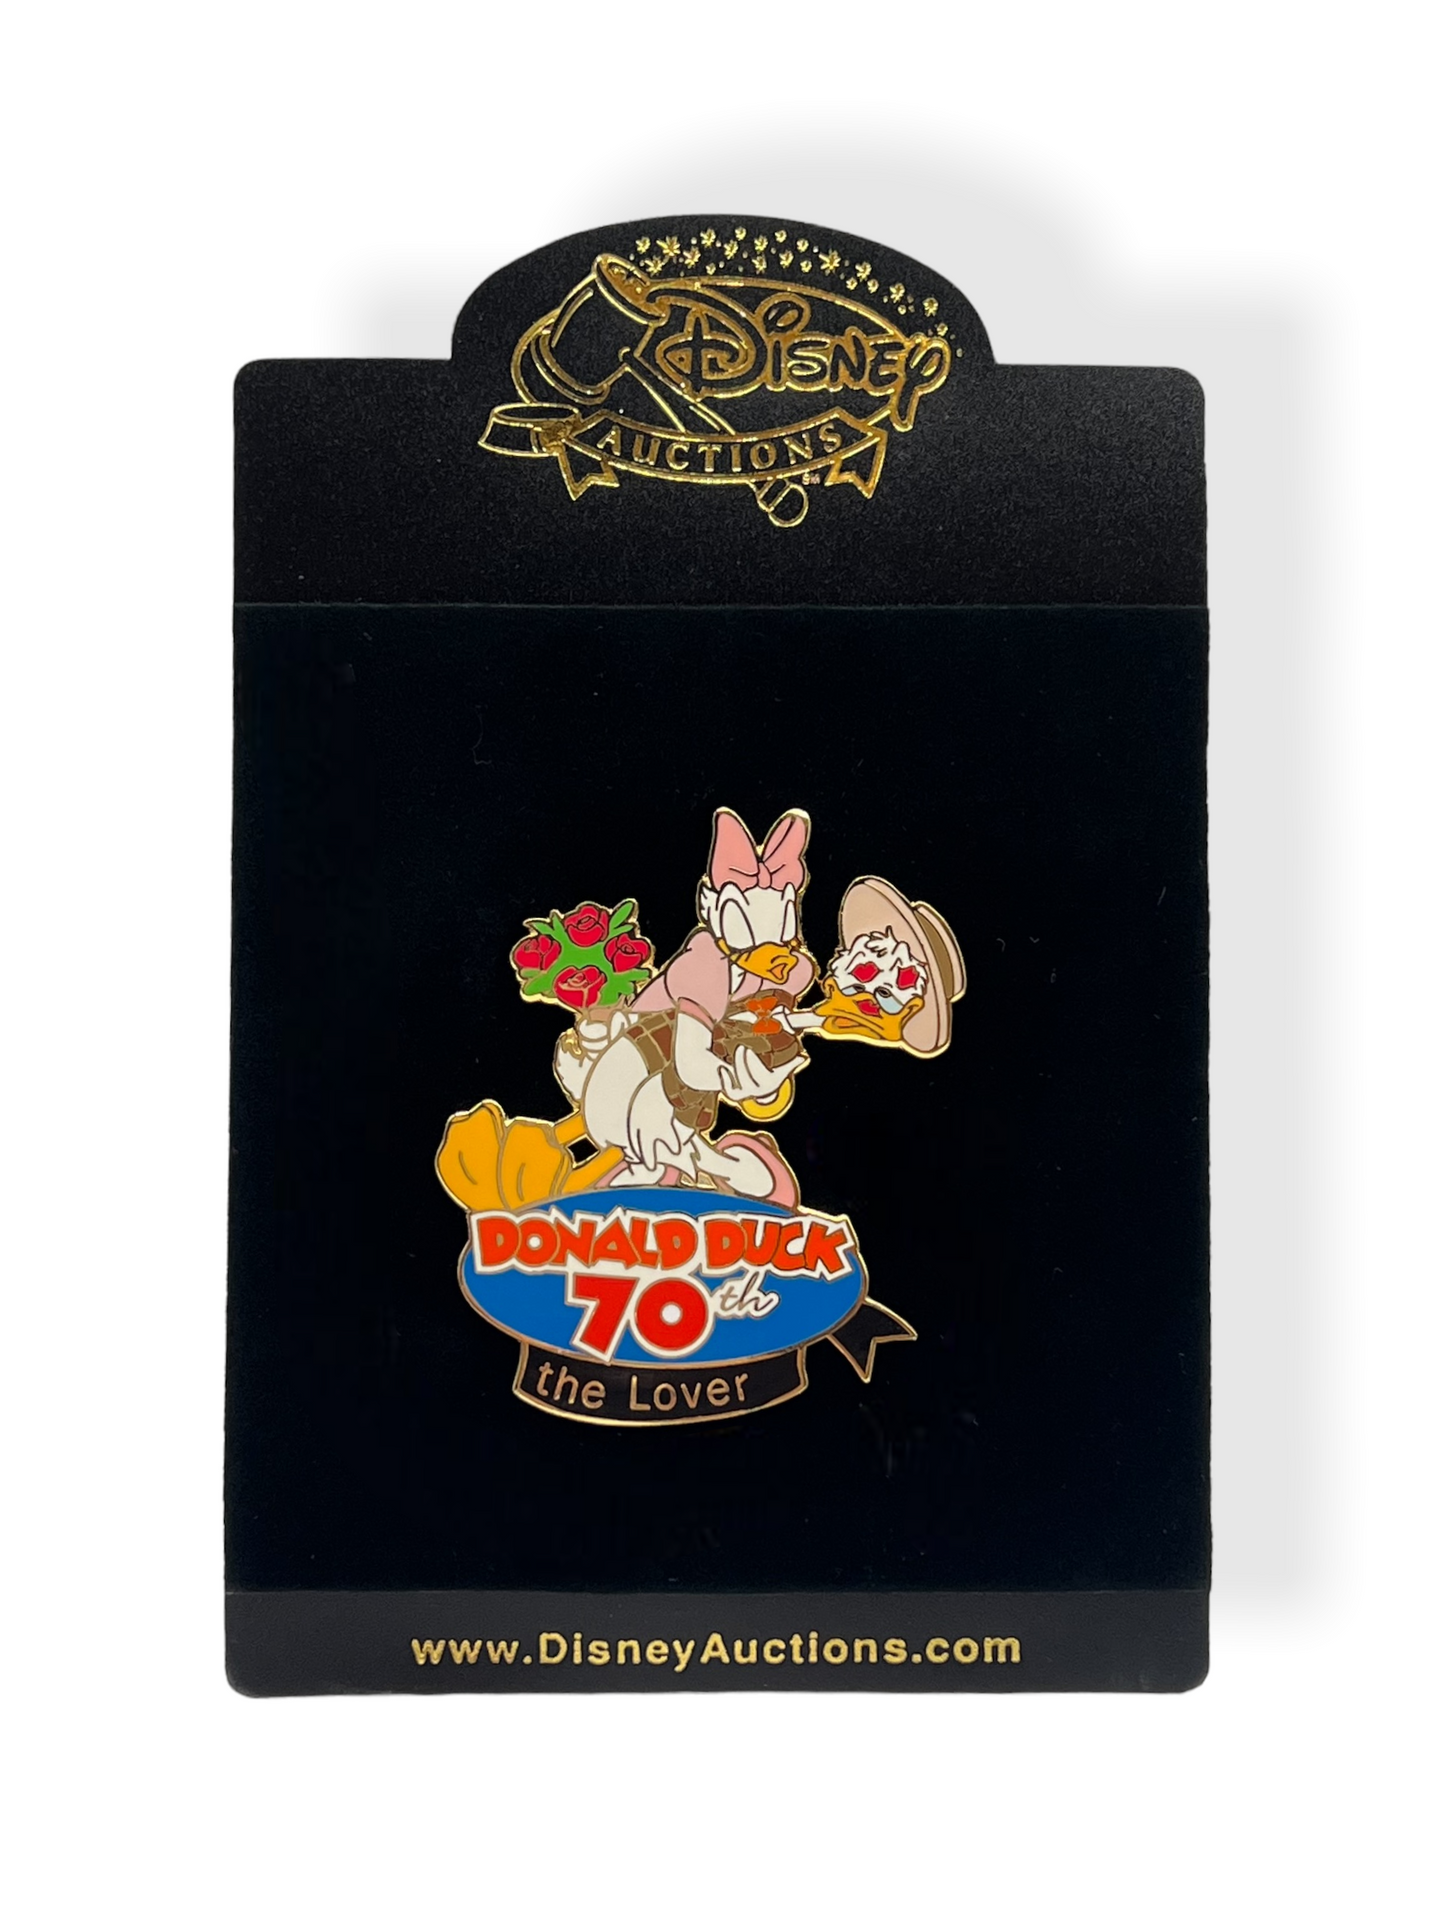 Disney Auctions 70th Anniversary Donald Duck The Lover Pin